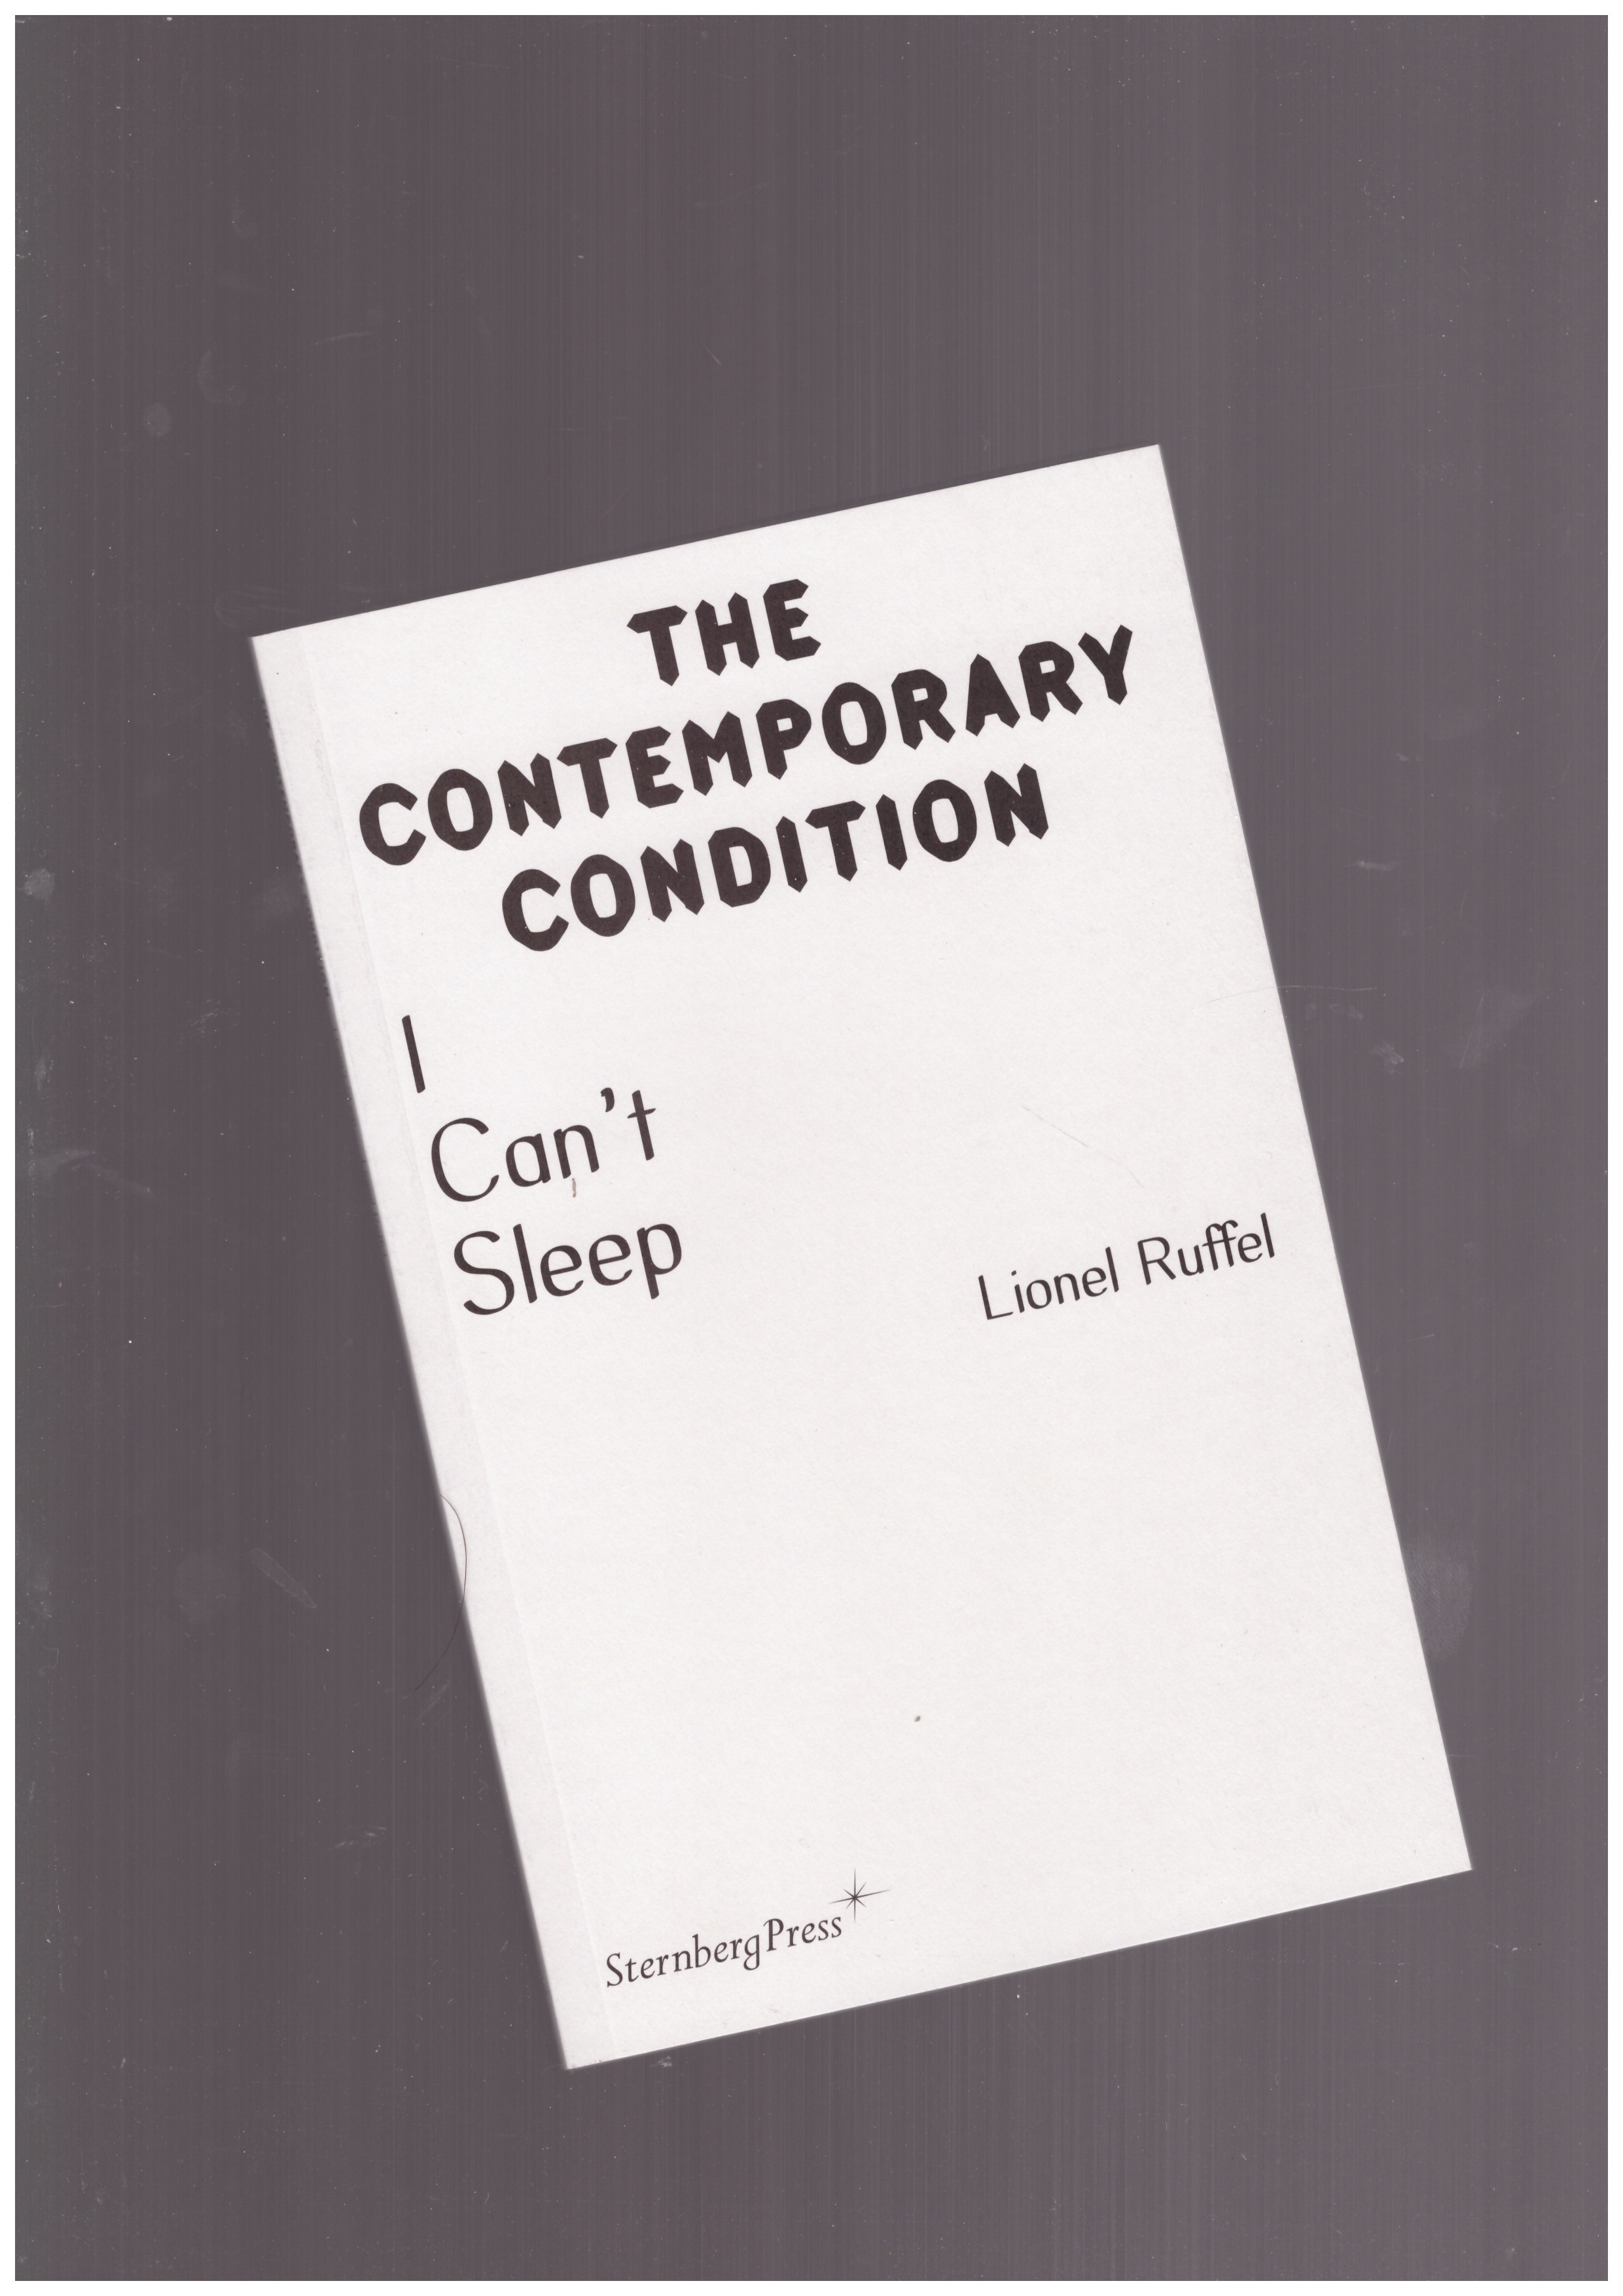 RUFFEL, Lionel - The Contemporary Condition – I can't sleep